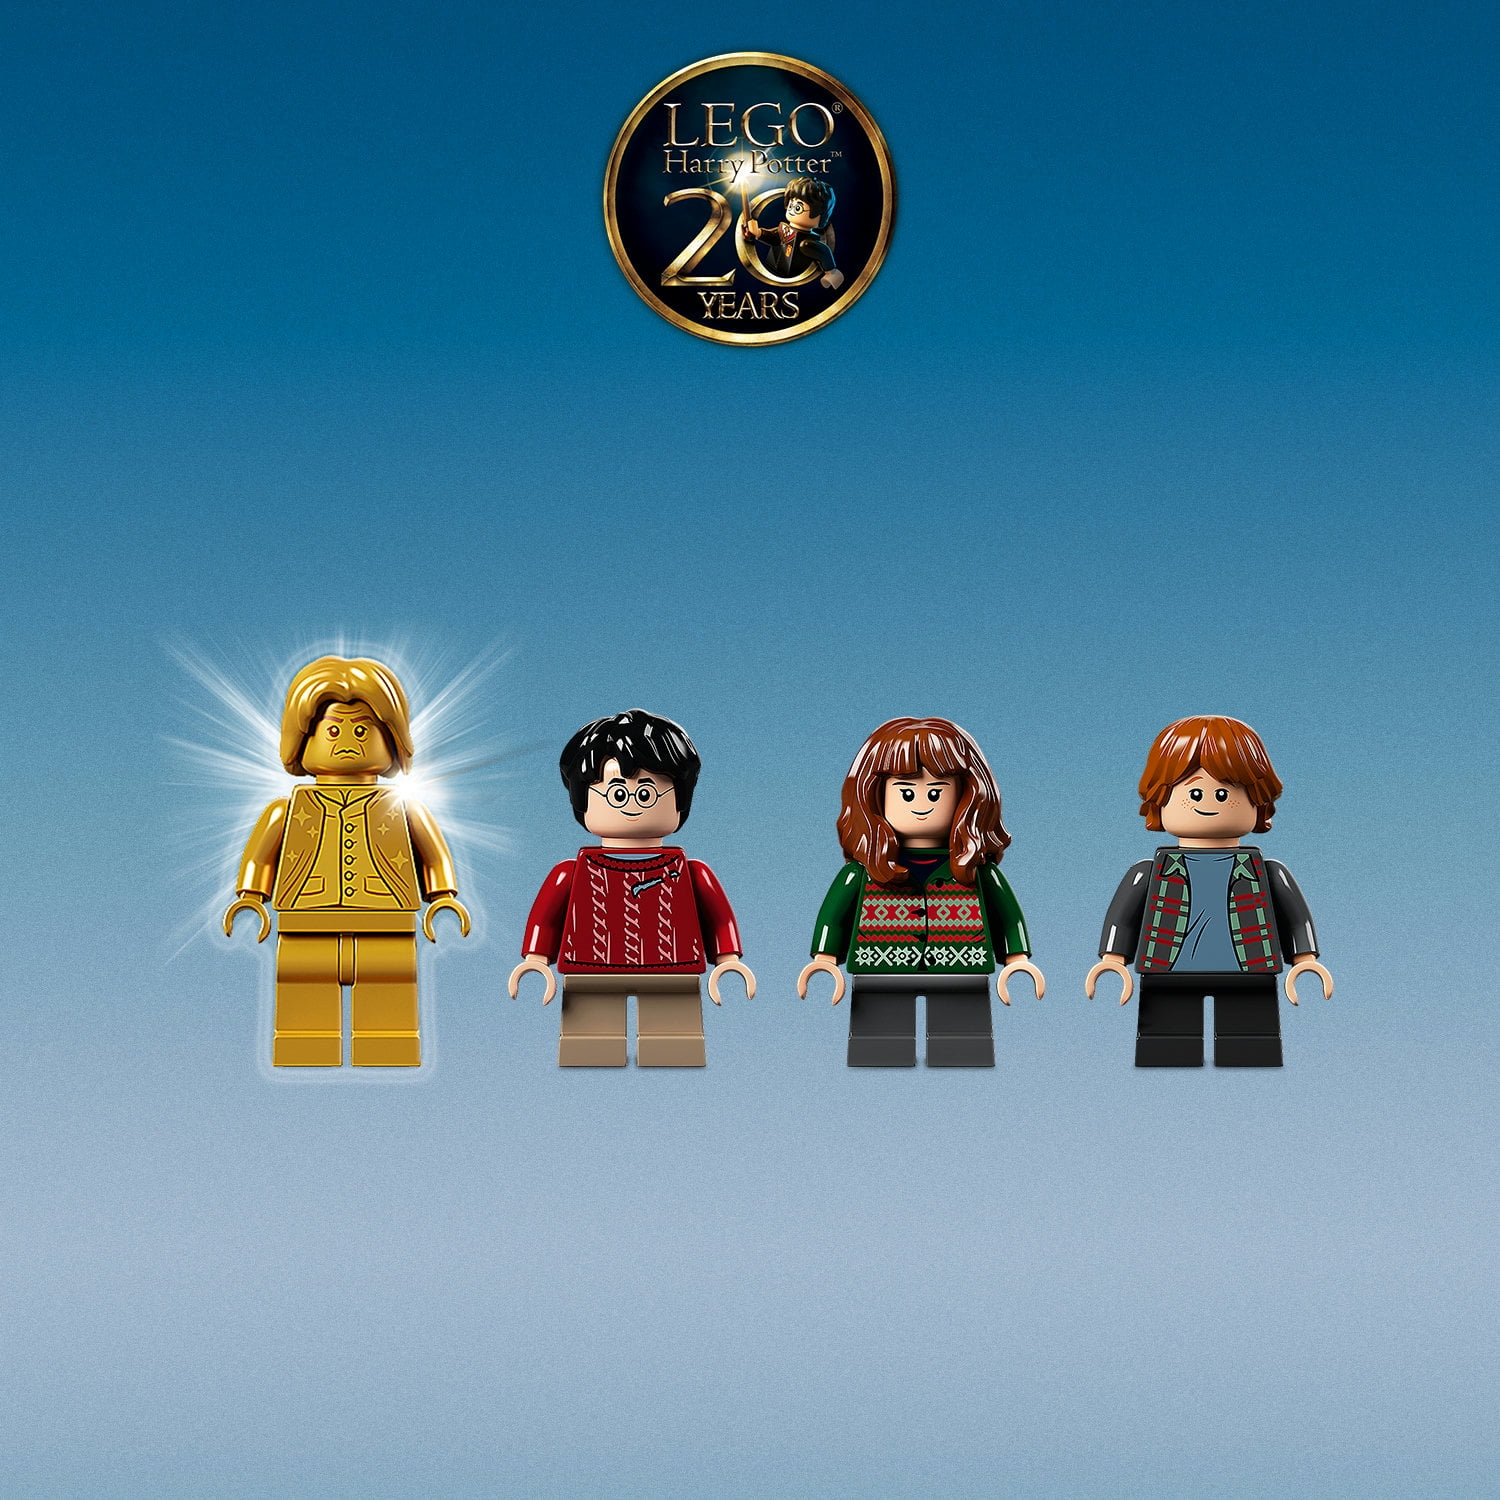 New LEGO Harry Potter sets unveiled – giant minifigures, Hogsmeade,  Wizard's Chess – Blocks – the monthly LEGO magazine for fans